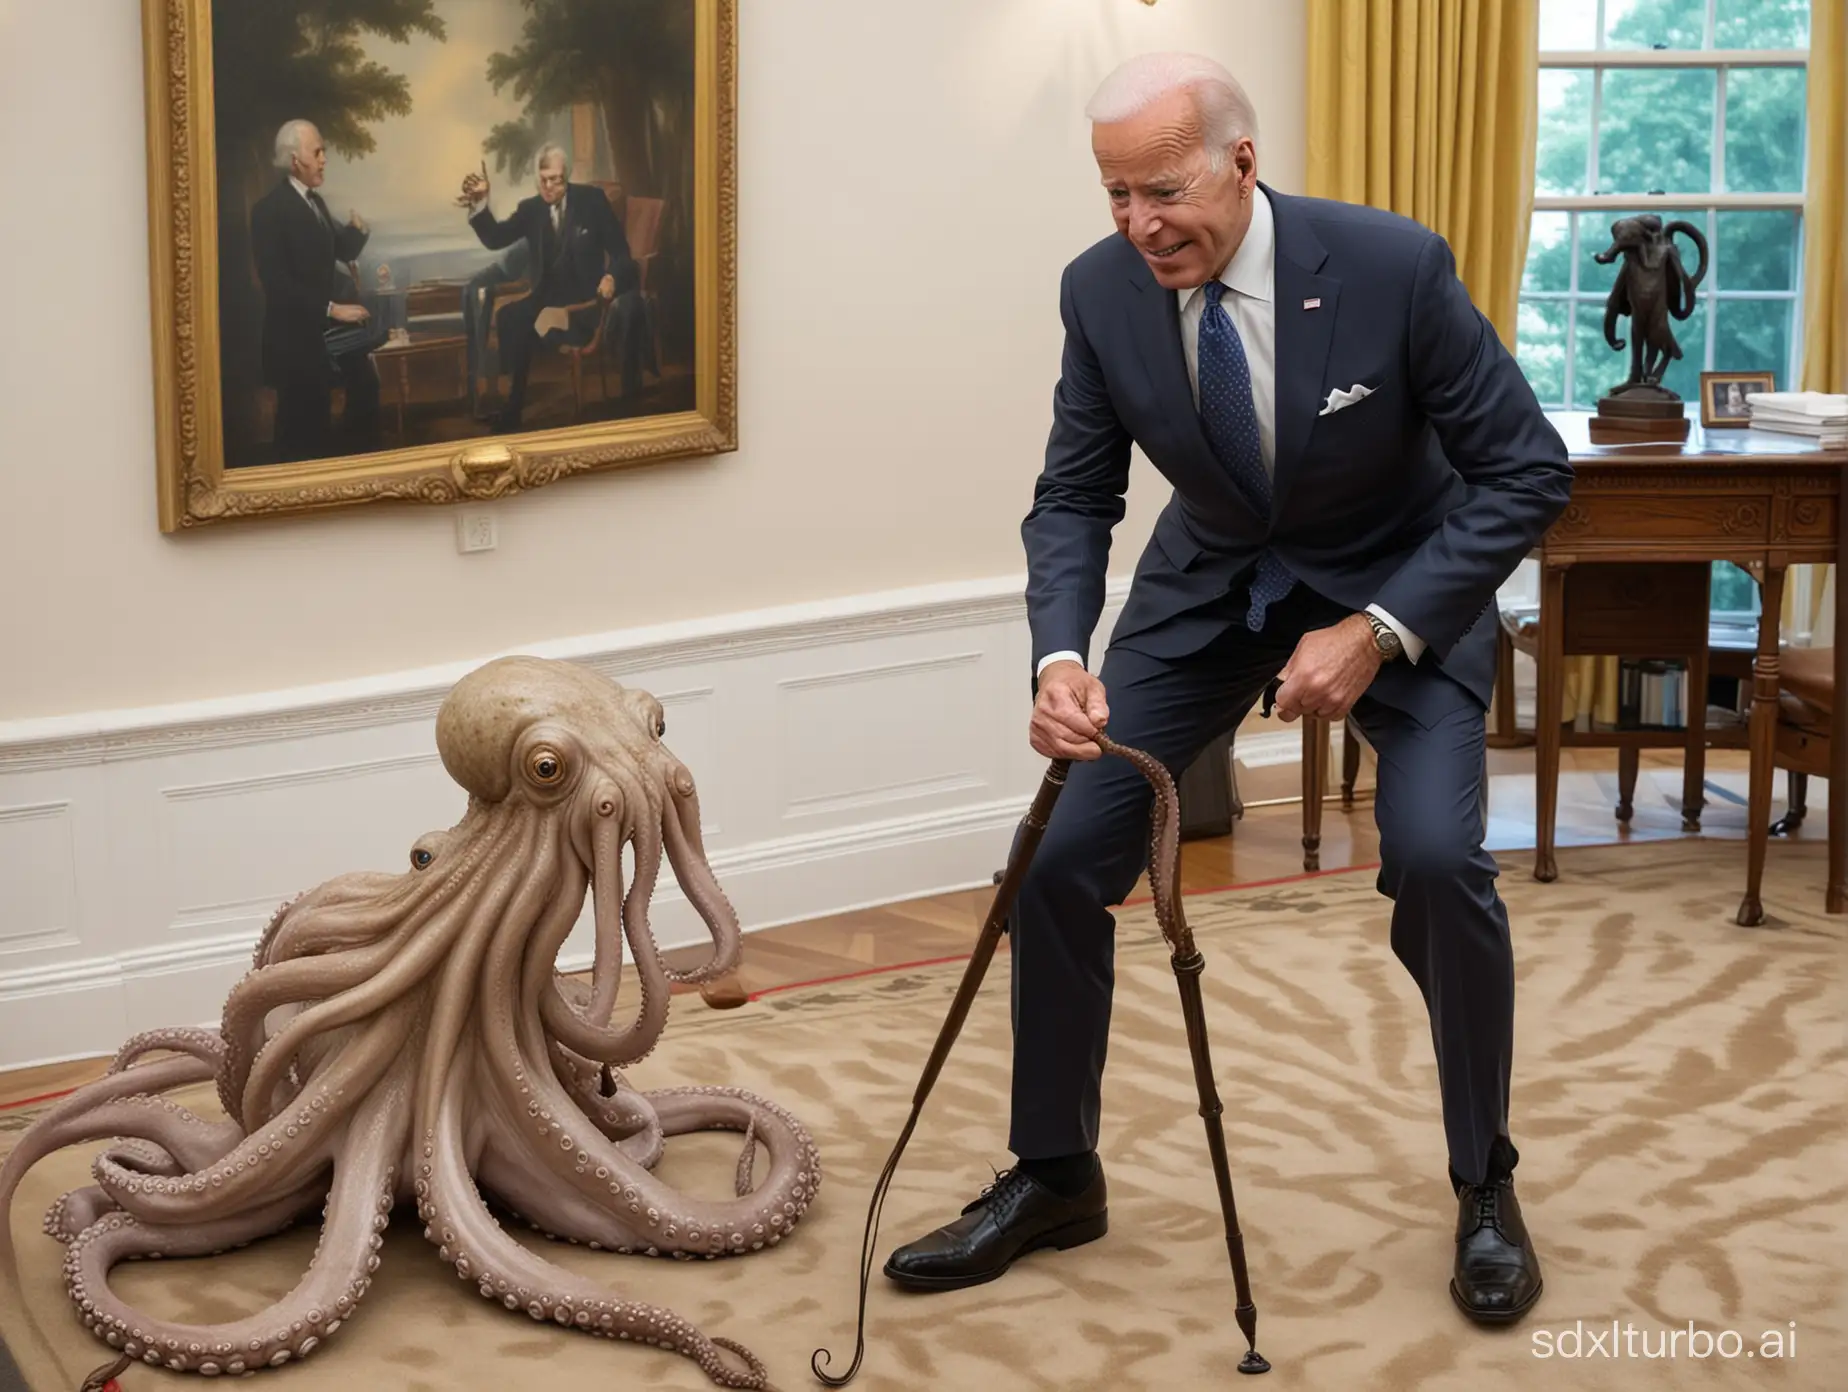 Joe Biden is wearing a grey suit and is greeting a very lifelike looking slimy octopus in the Oval Office of the White House.  The octopus it wearing a top hat and holding a cane.  President Joe Biden is very happy to meet the slimy octopus. He wants to give the slimy wet octopus the medal of honor. This is a very clean and high resolution realistically human rendering of both President Biden and the slimy wet octopus.